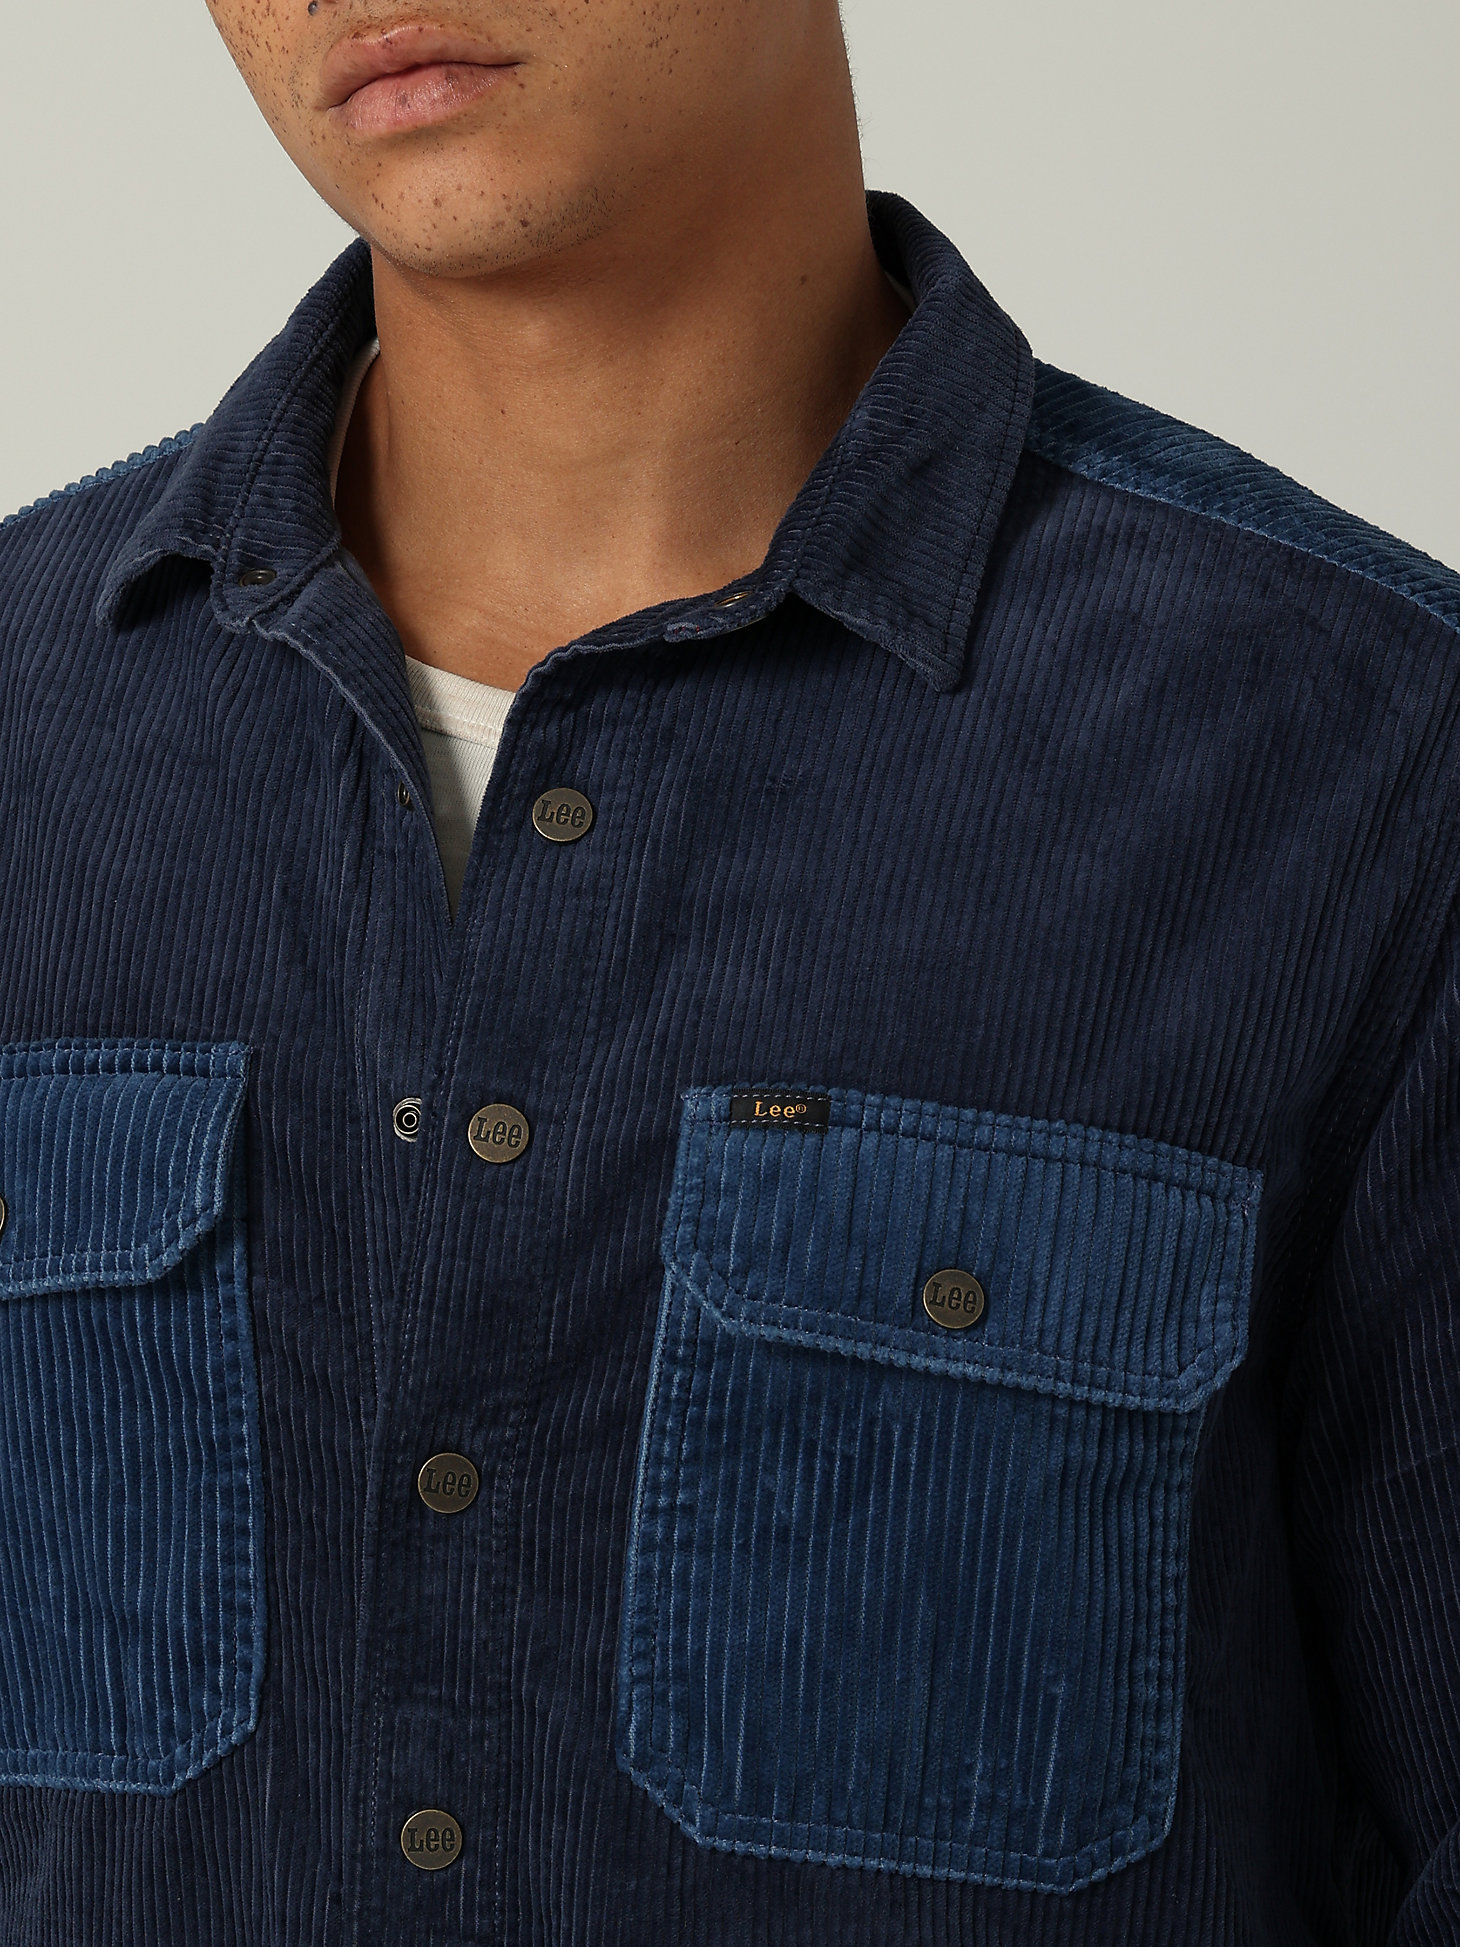 Men's Lee European Collection Relaxed Fit Corduroy Workwear Overshirt in Mood Indigo alternative view 2